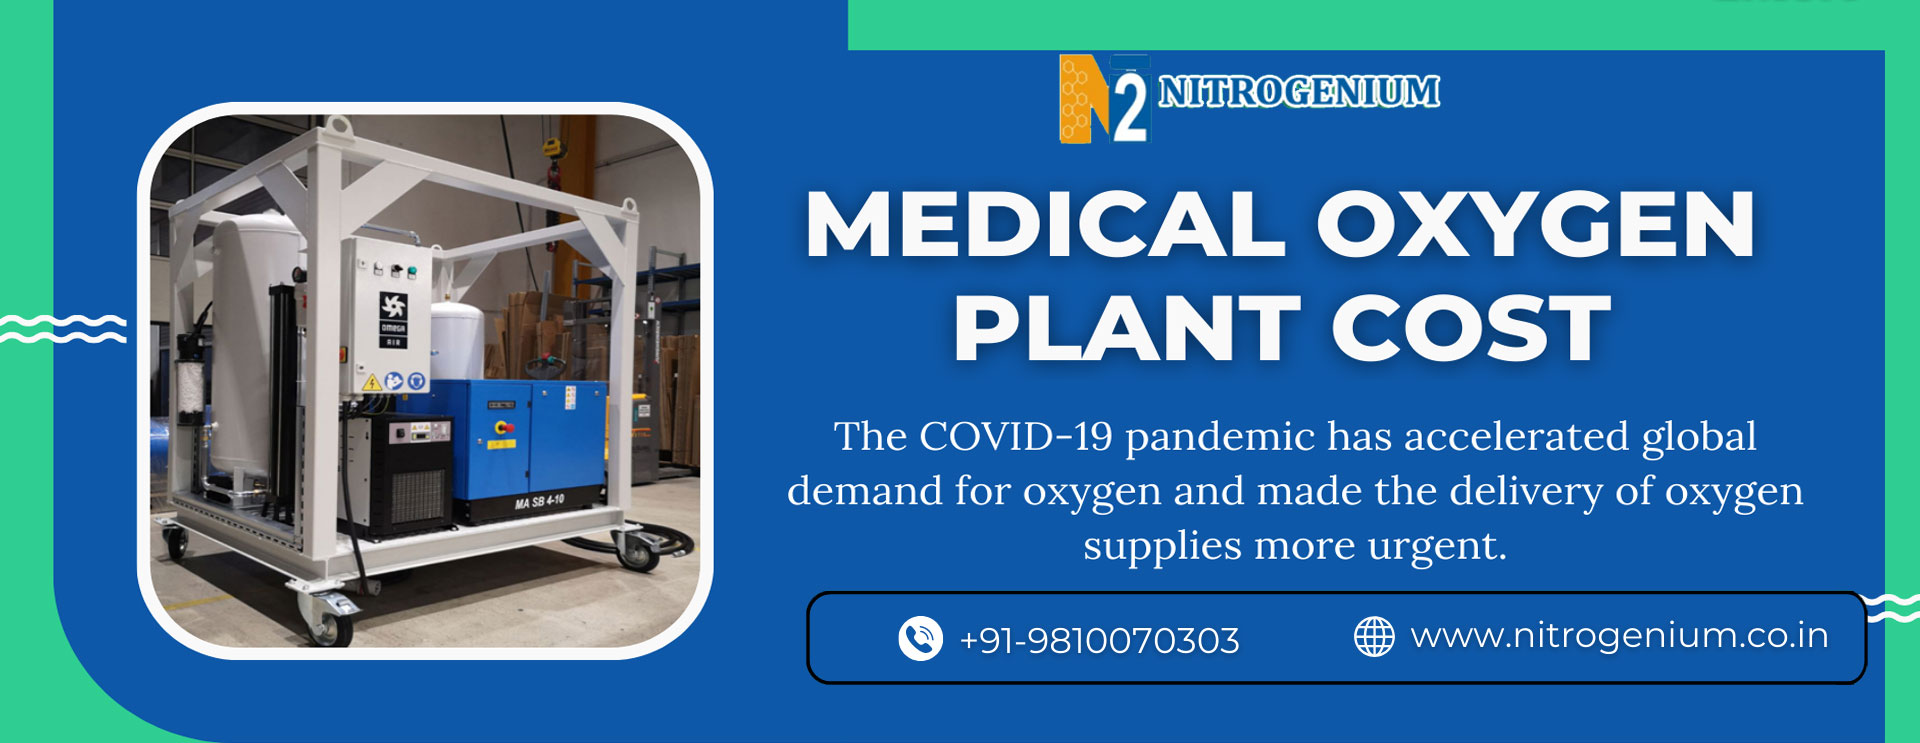 Medical Oxygen Plant Cost